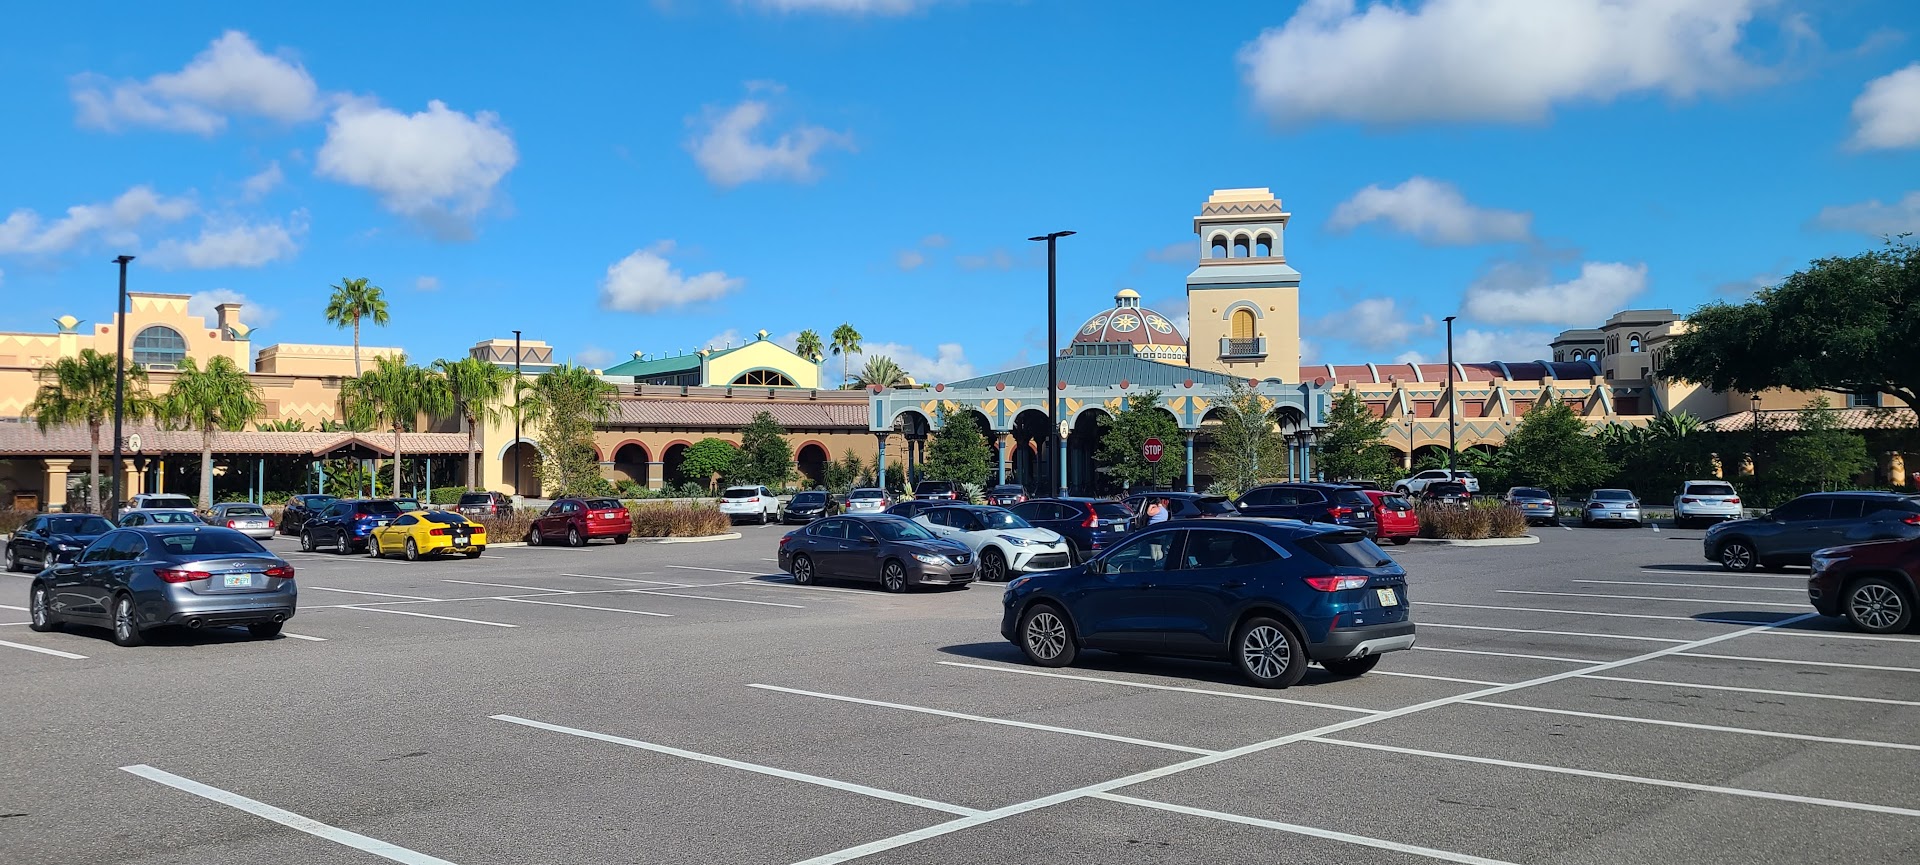 Can I Park At A Disney Resort Without Staying There? Tips 4